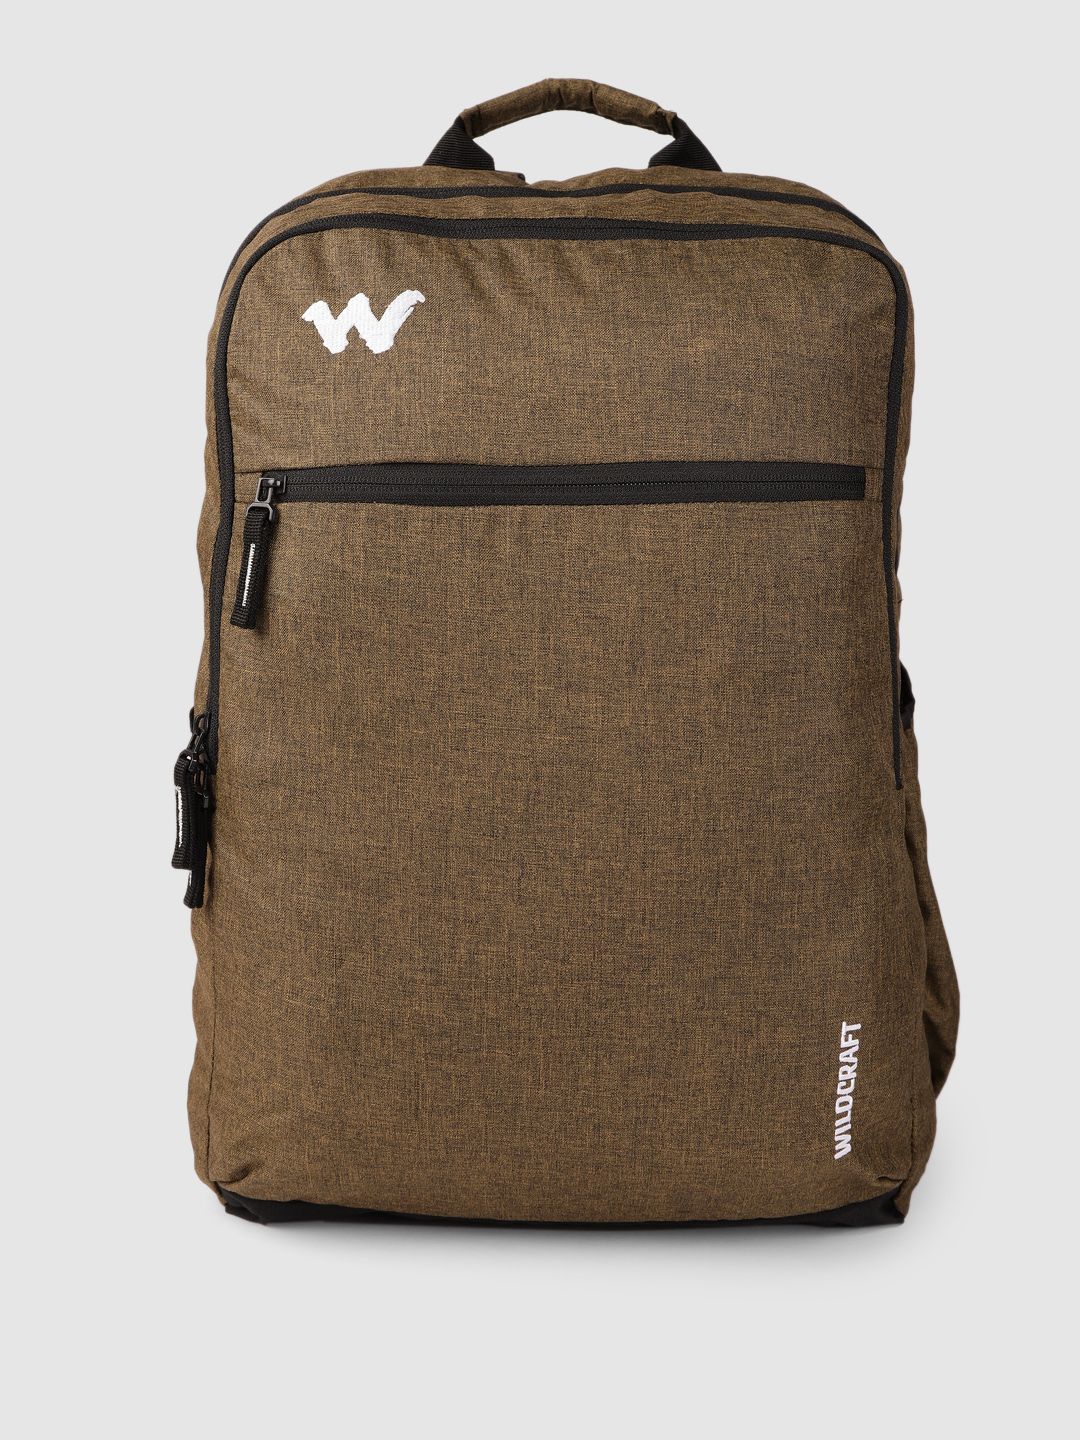 Wildcraft Unisex Khaki Brown Frame 2 Backpack Price in India